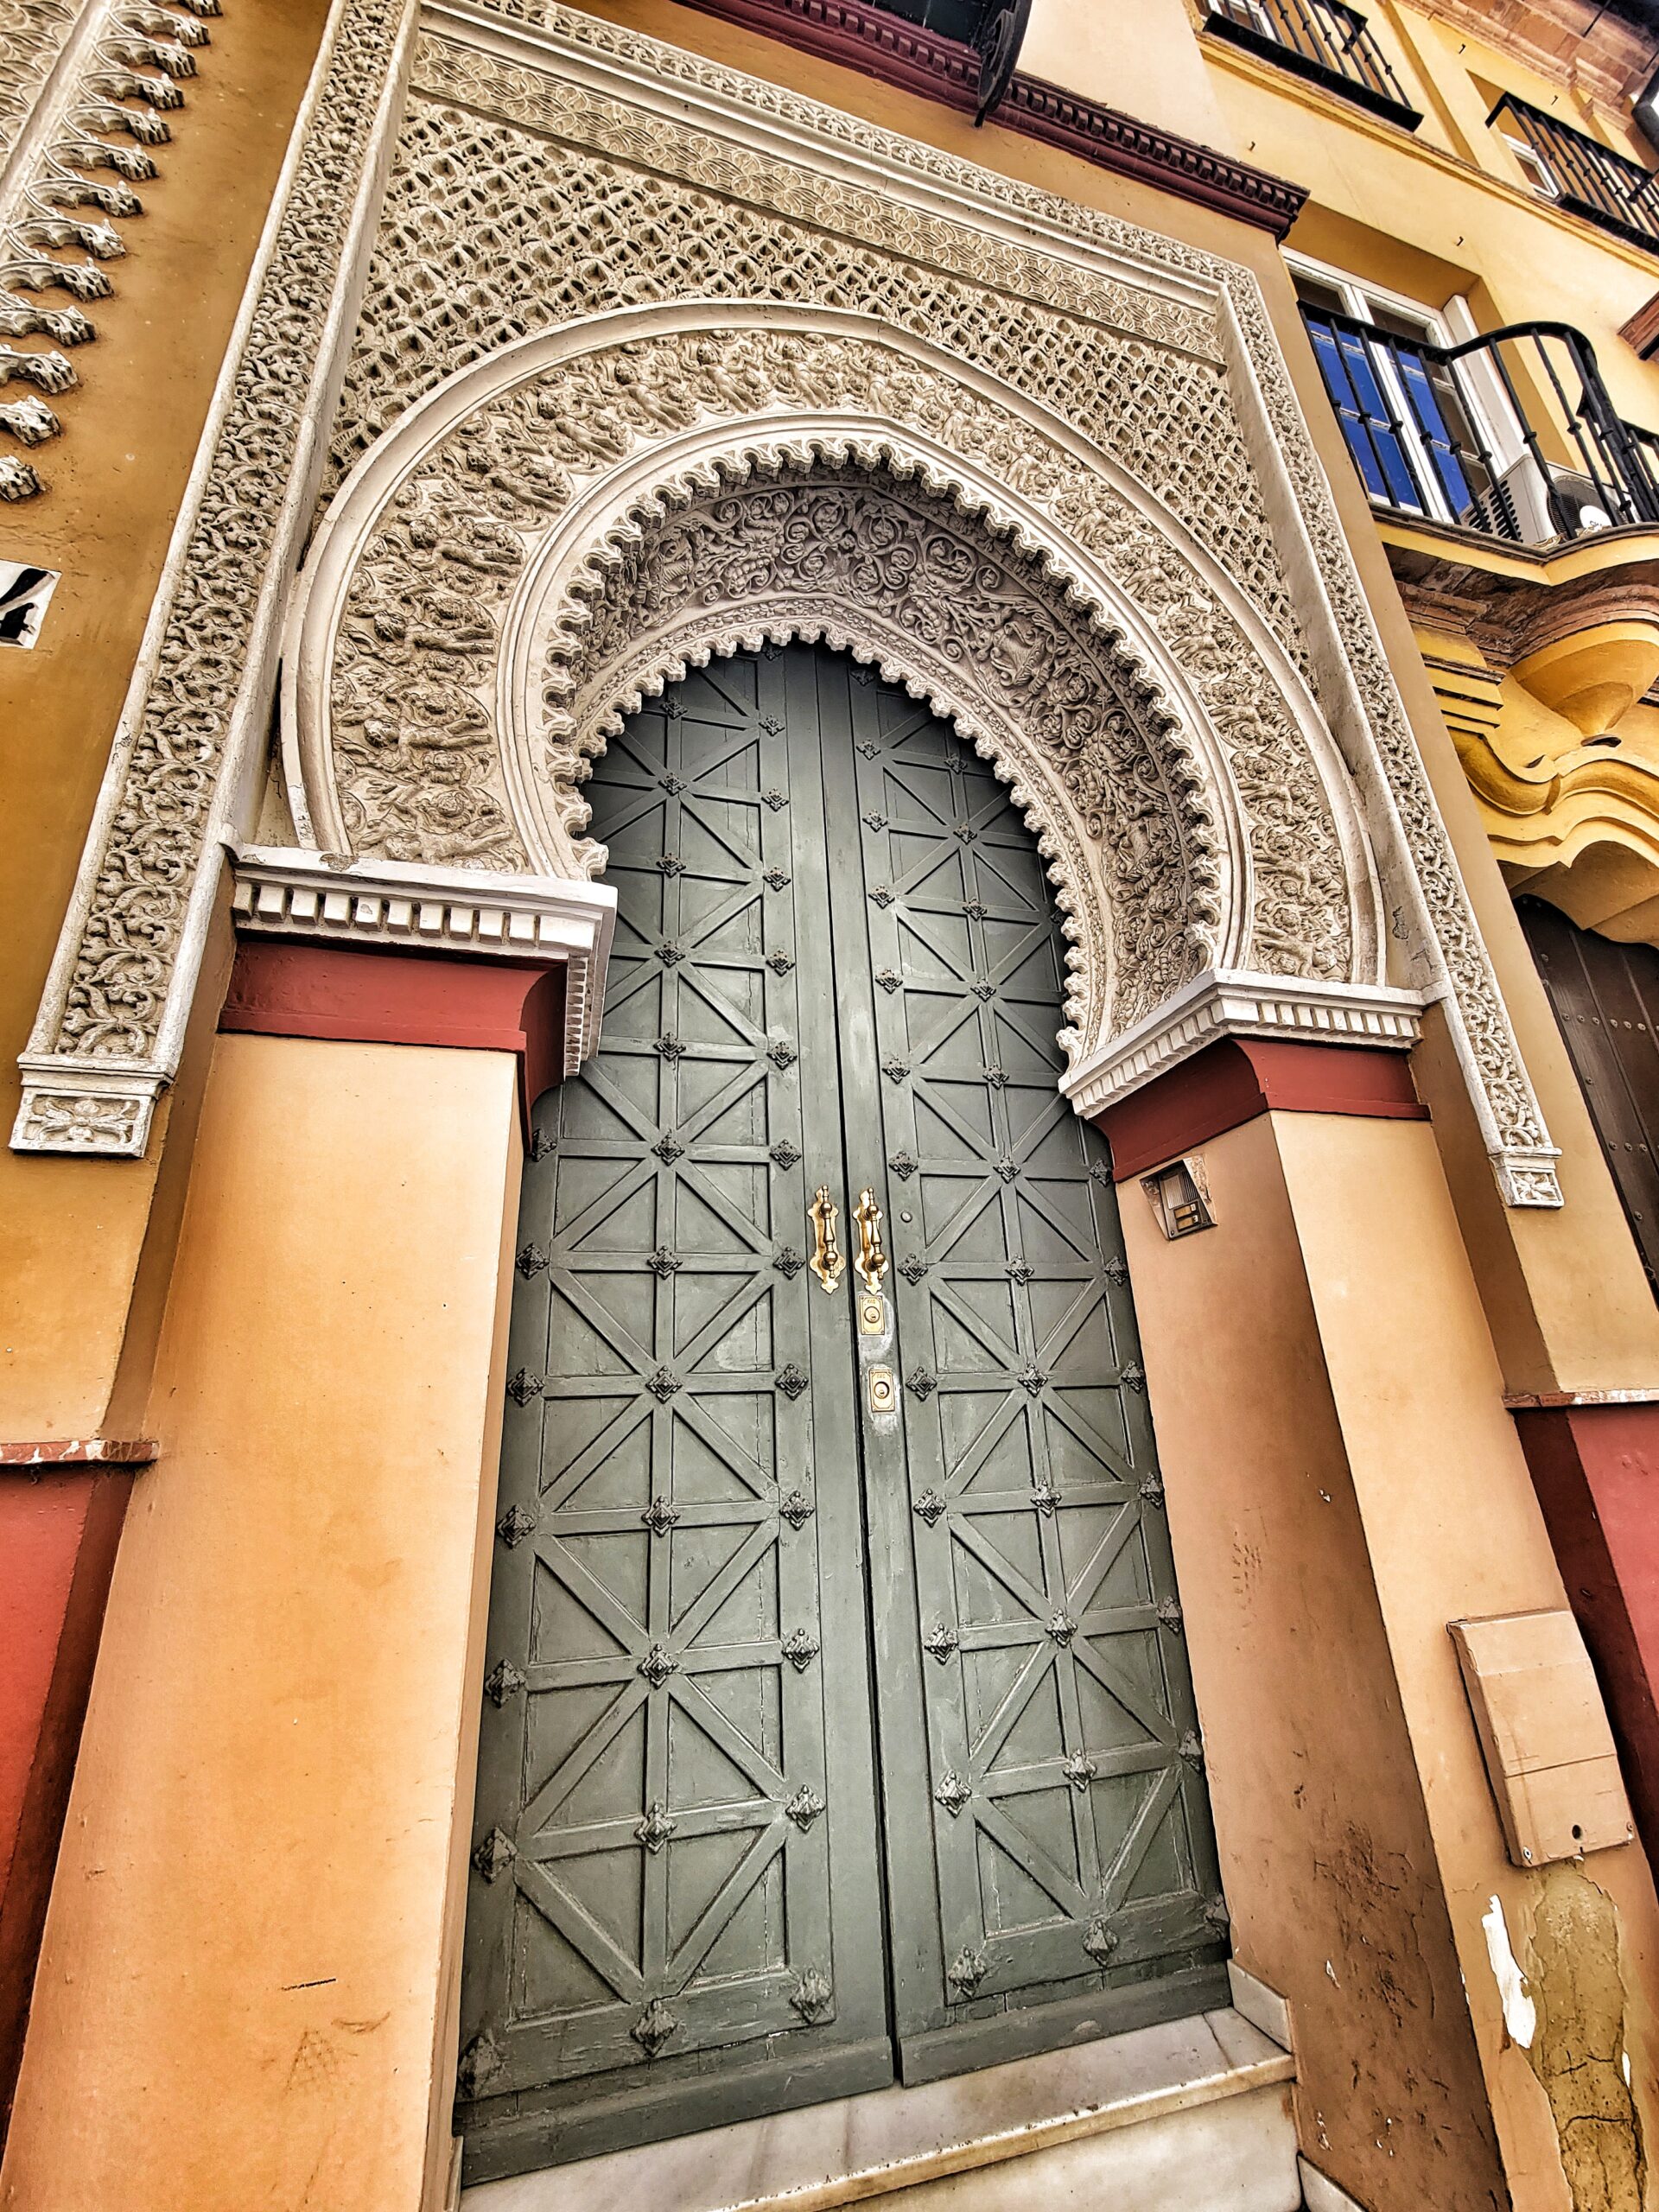 Stunning, intricate Entryway in Sevilla, Spain